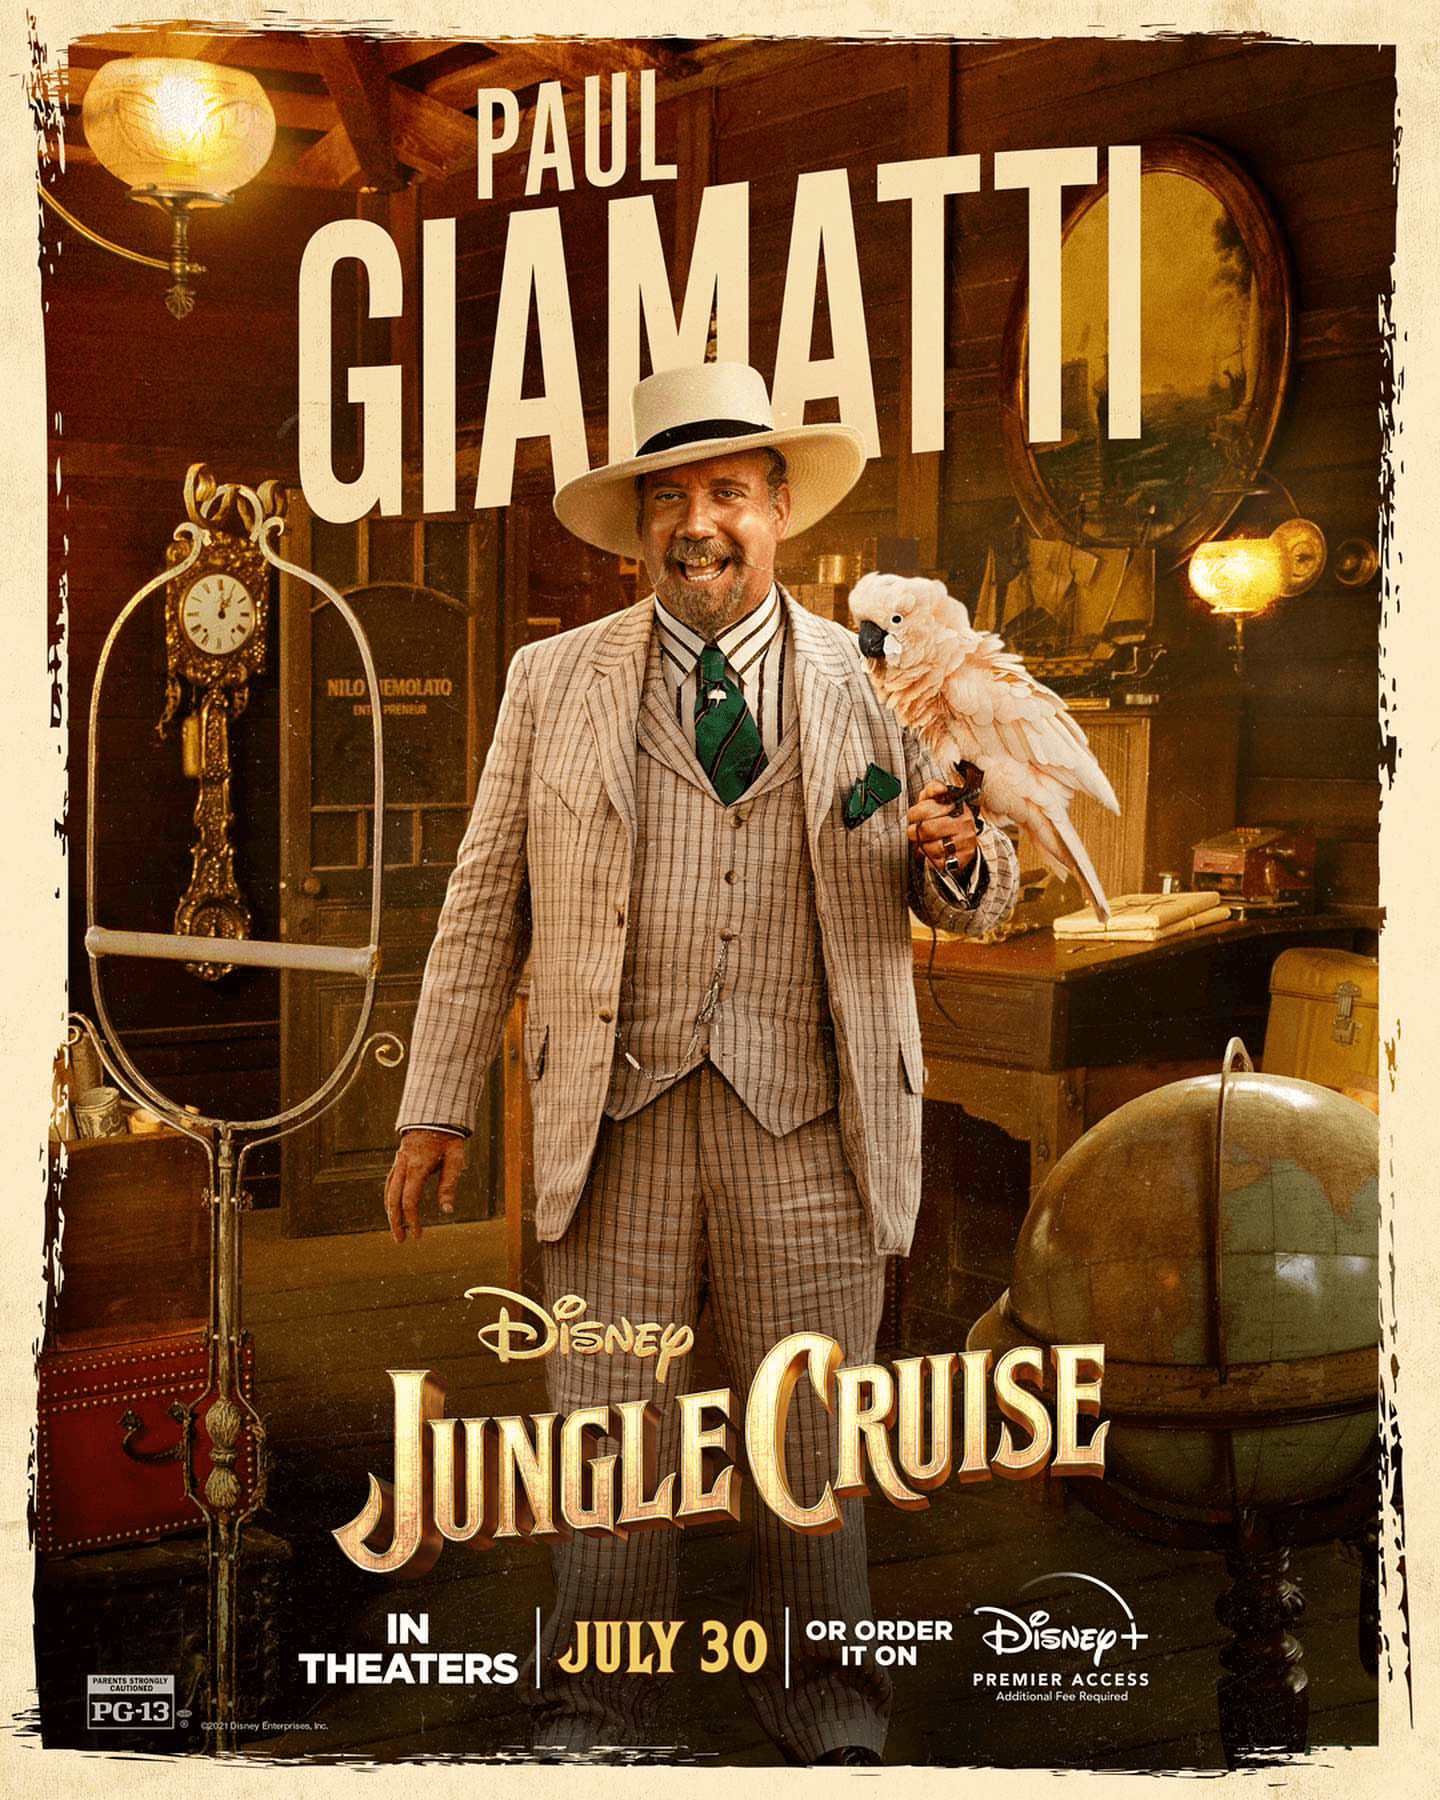 "Jungle Cruise" released the latest character poster